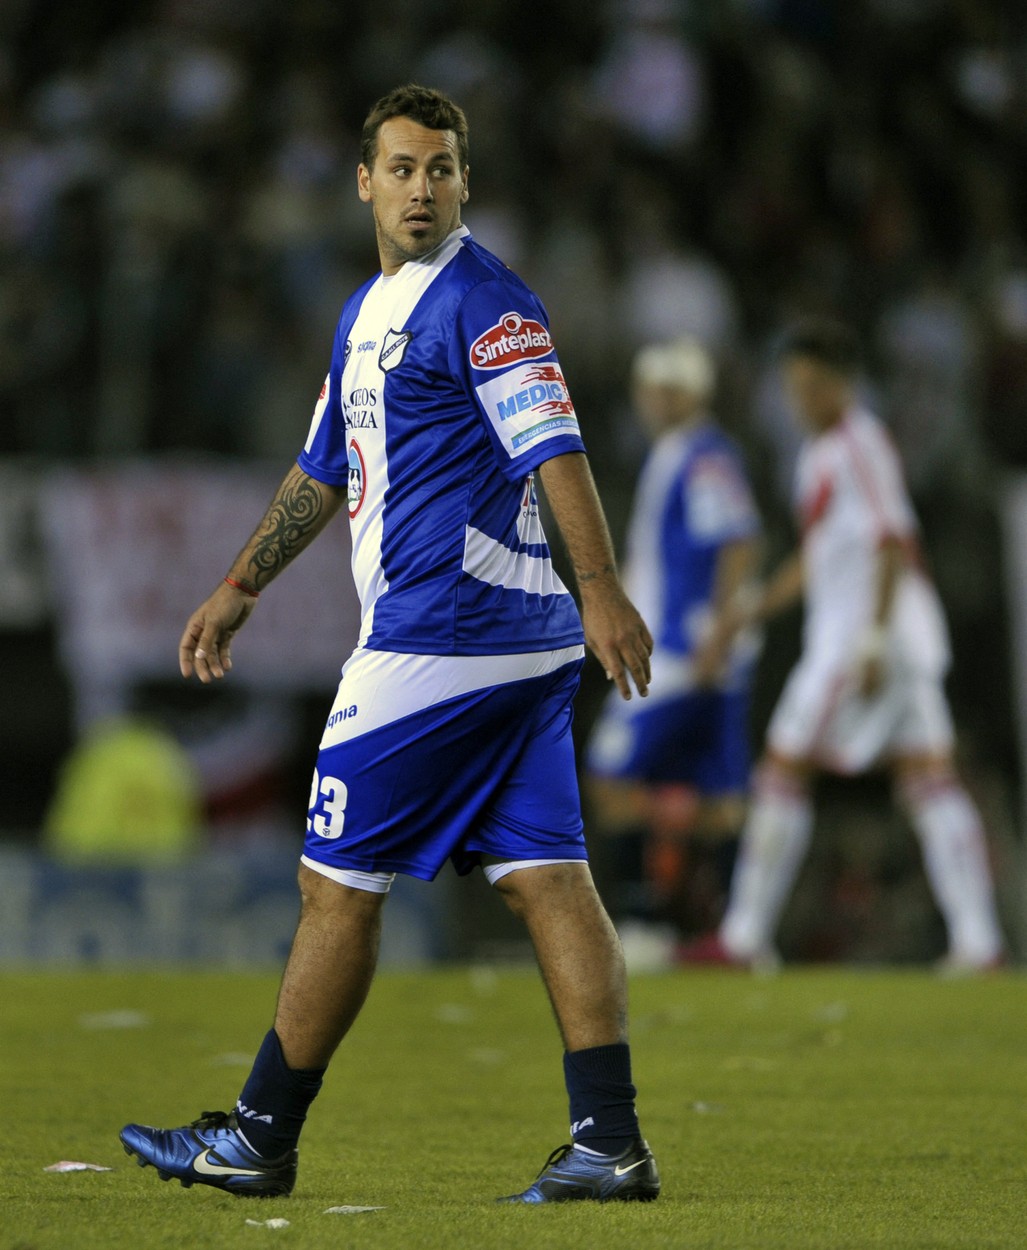 All Boys' forward Cristian Fabbiani (L) walks during Argentina's First Division football match against River Plate, at the Monumental stadium, in Buenos Aires, on May 8, 2011.,Image: 93750562, License: Rights-managed, Restrictions: , Model Release: no